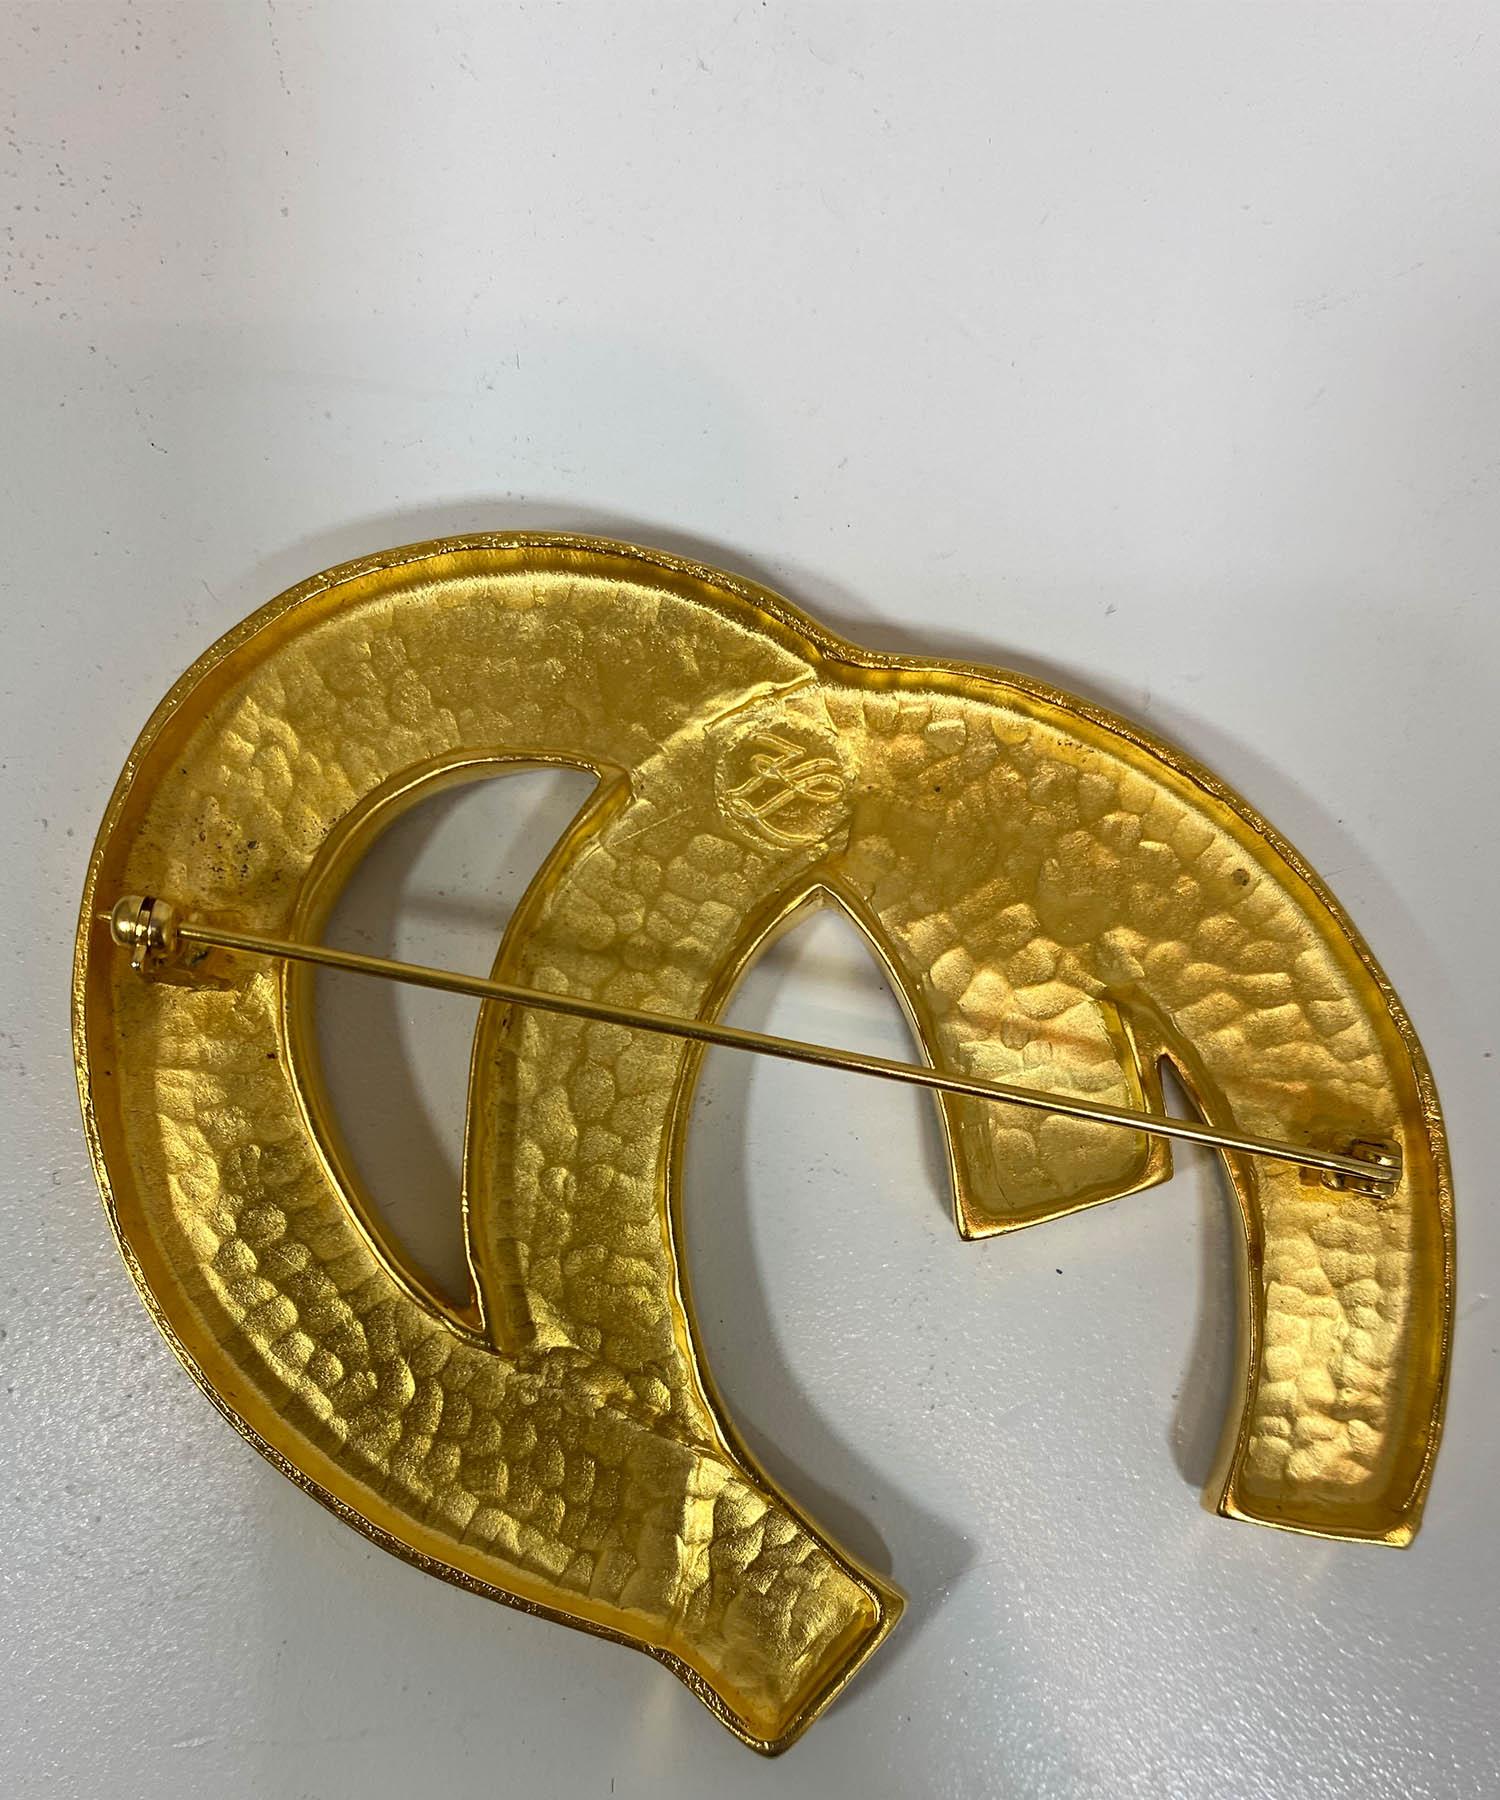 Karl Lagerfeld Massive Bonne Chance 1992 Horseshoe Brooch In Excellent Condition For Sale In Carmel, CA